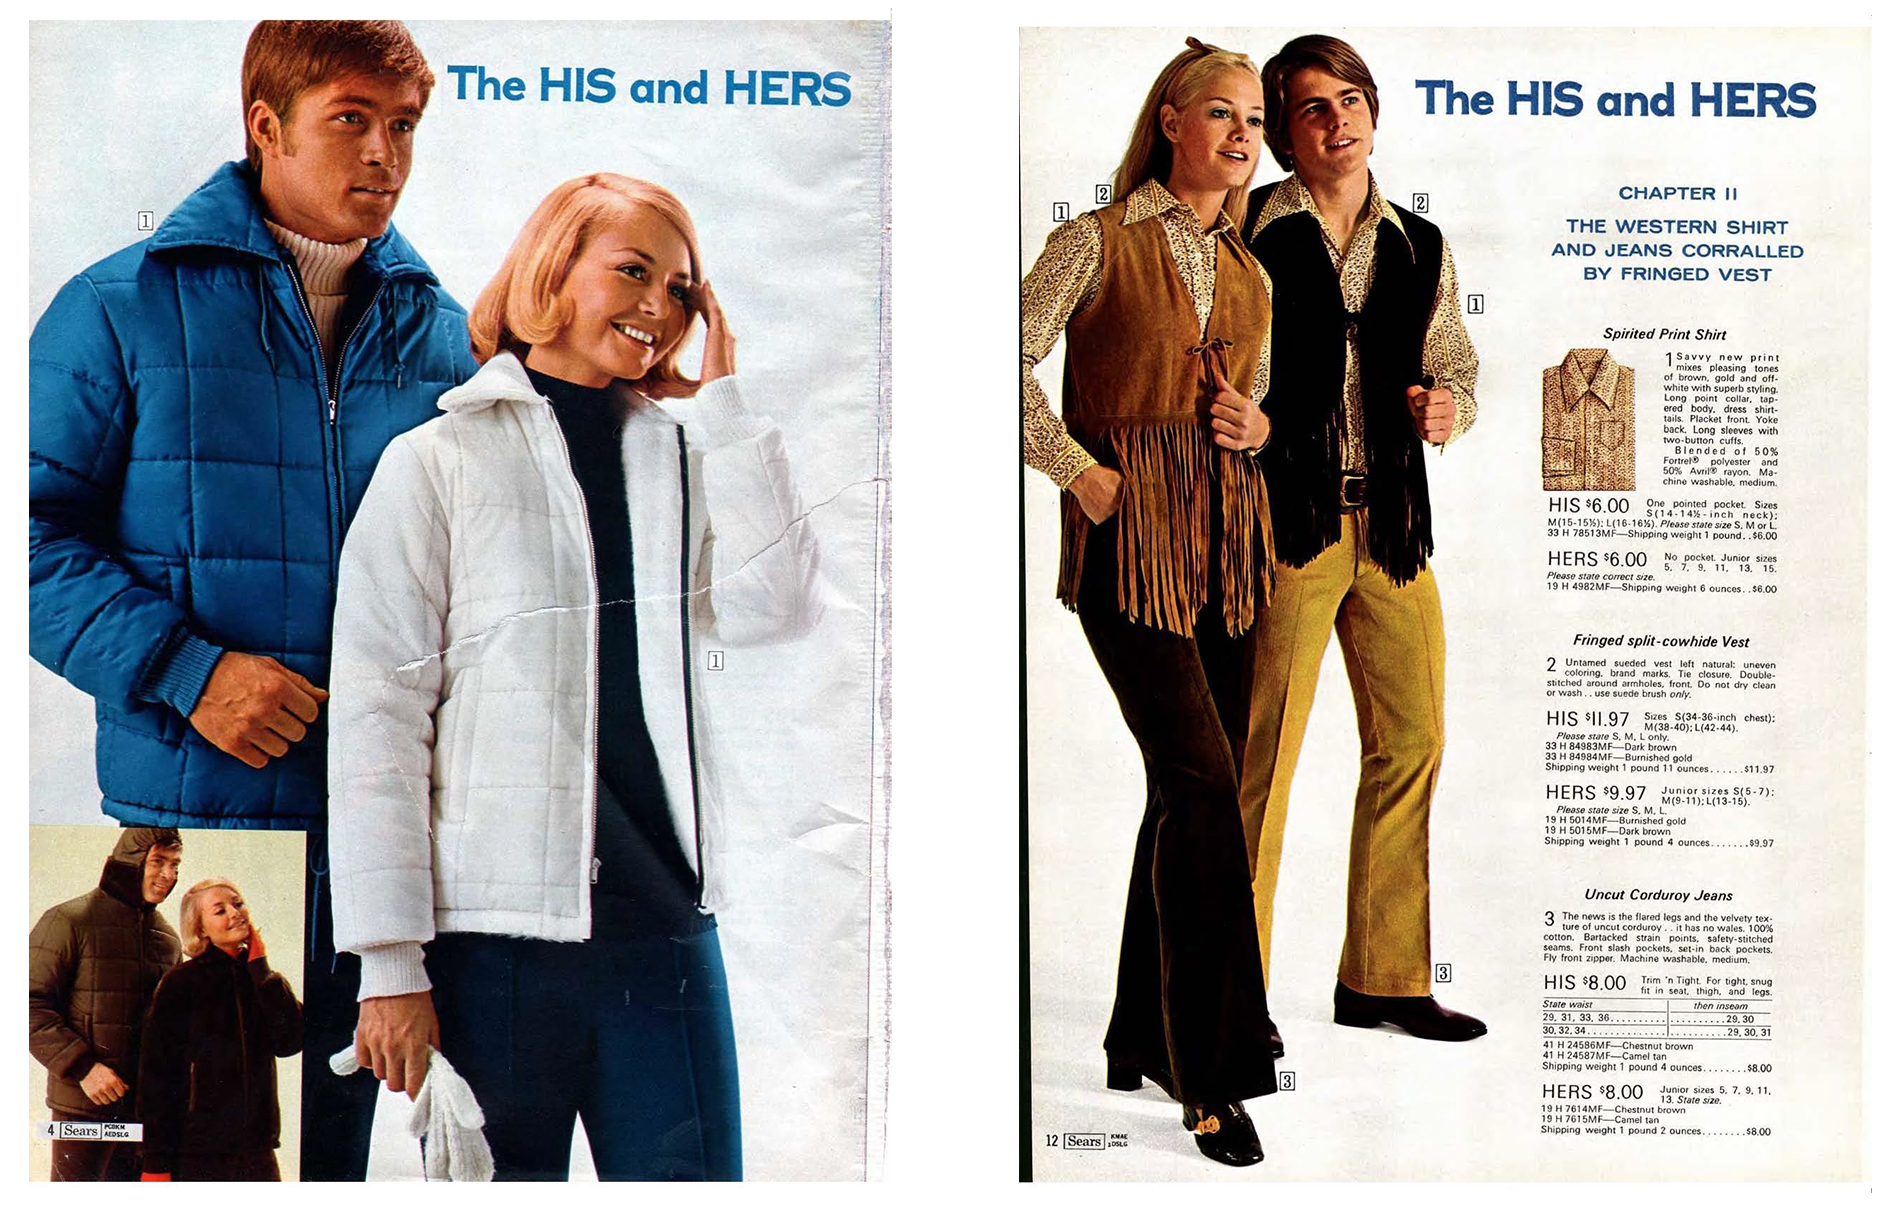 Catalog pages advertizing coats and pants